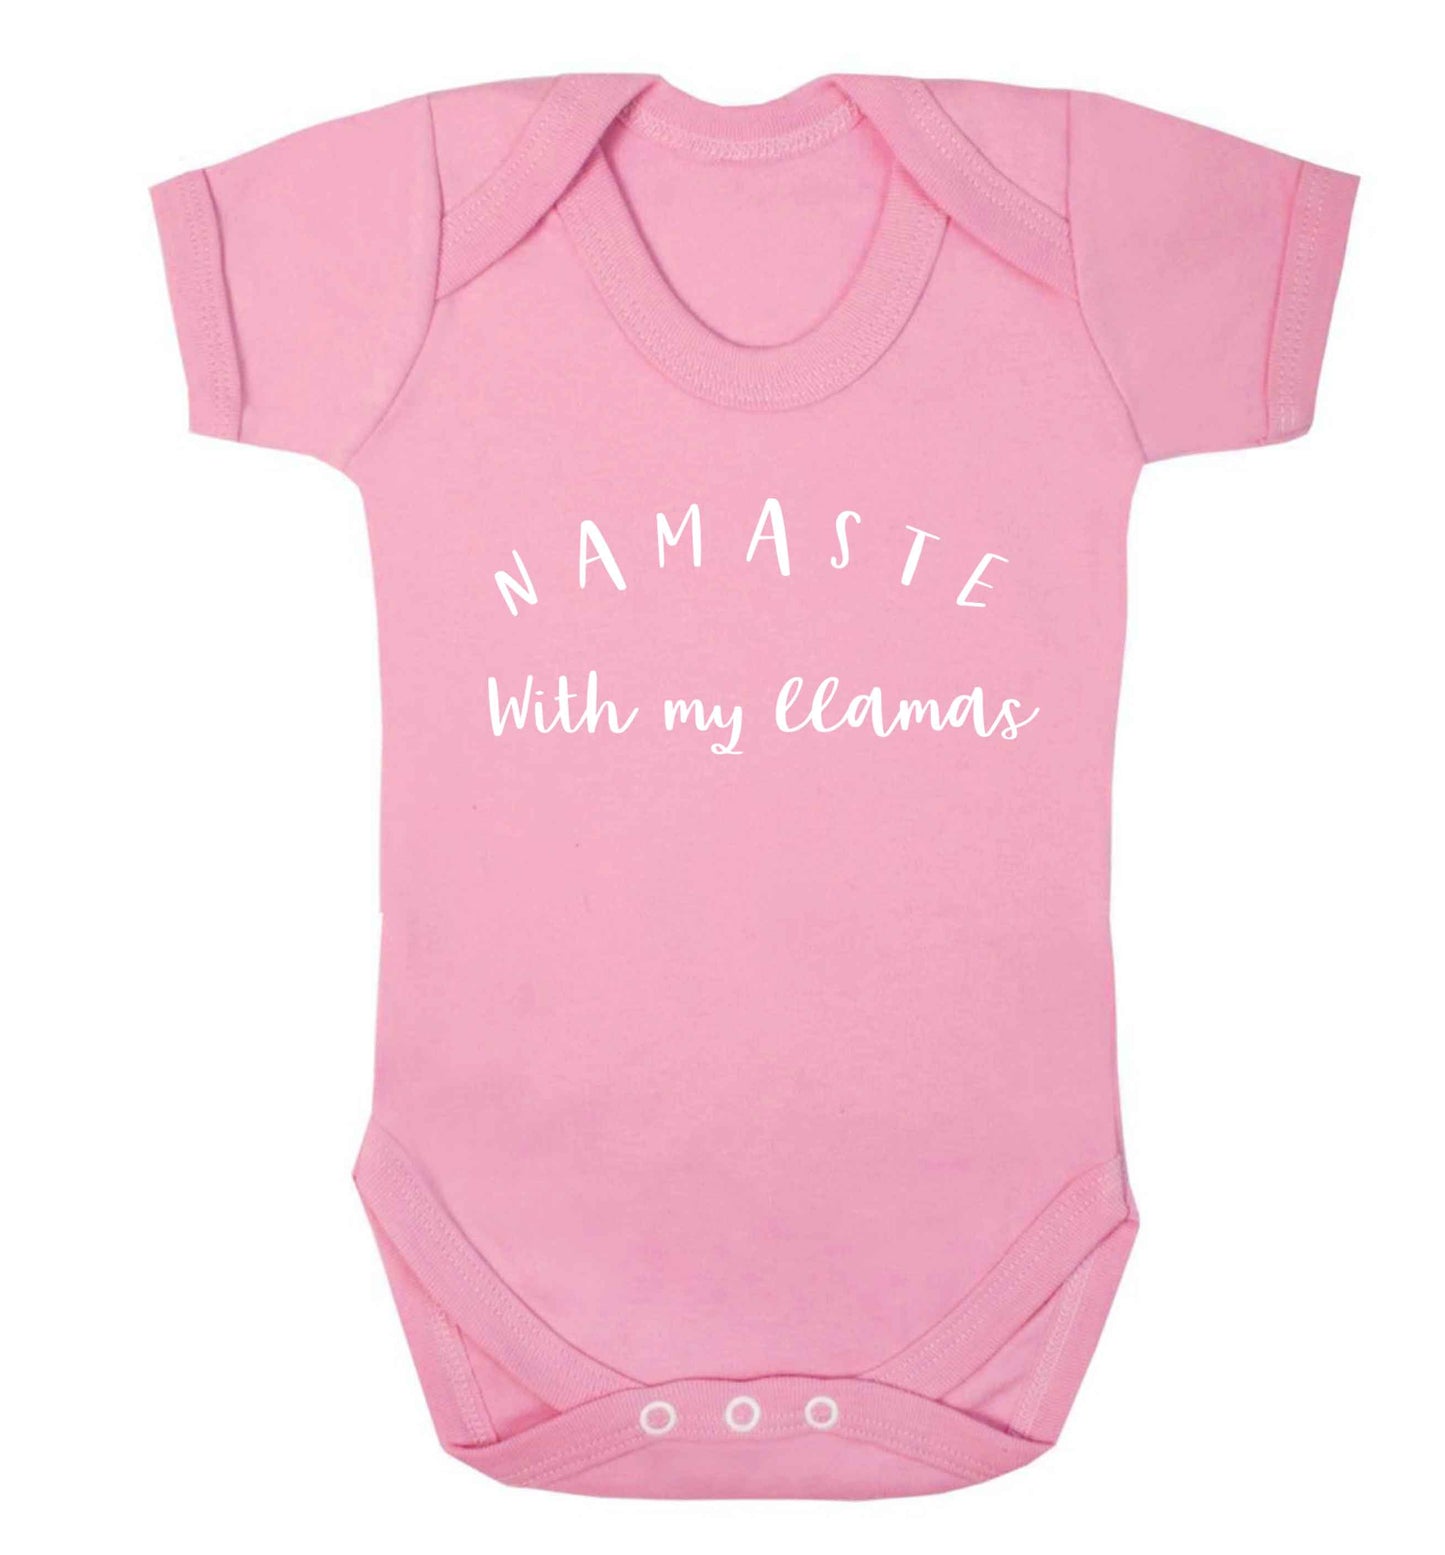 Namaste with my llamas Baby Vest pale pink 18-24 months